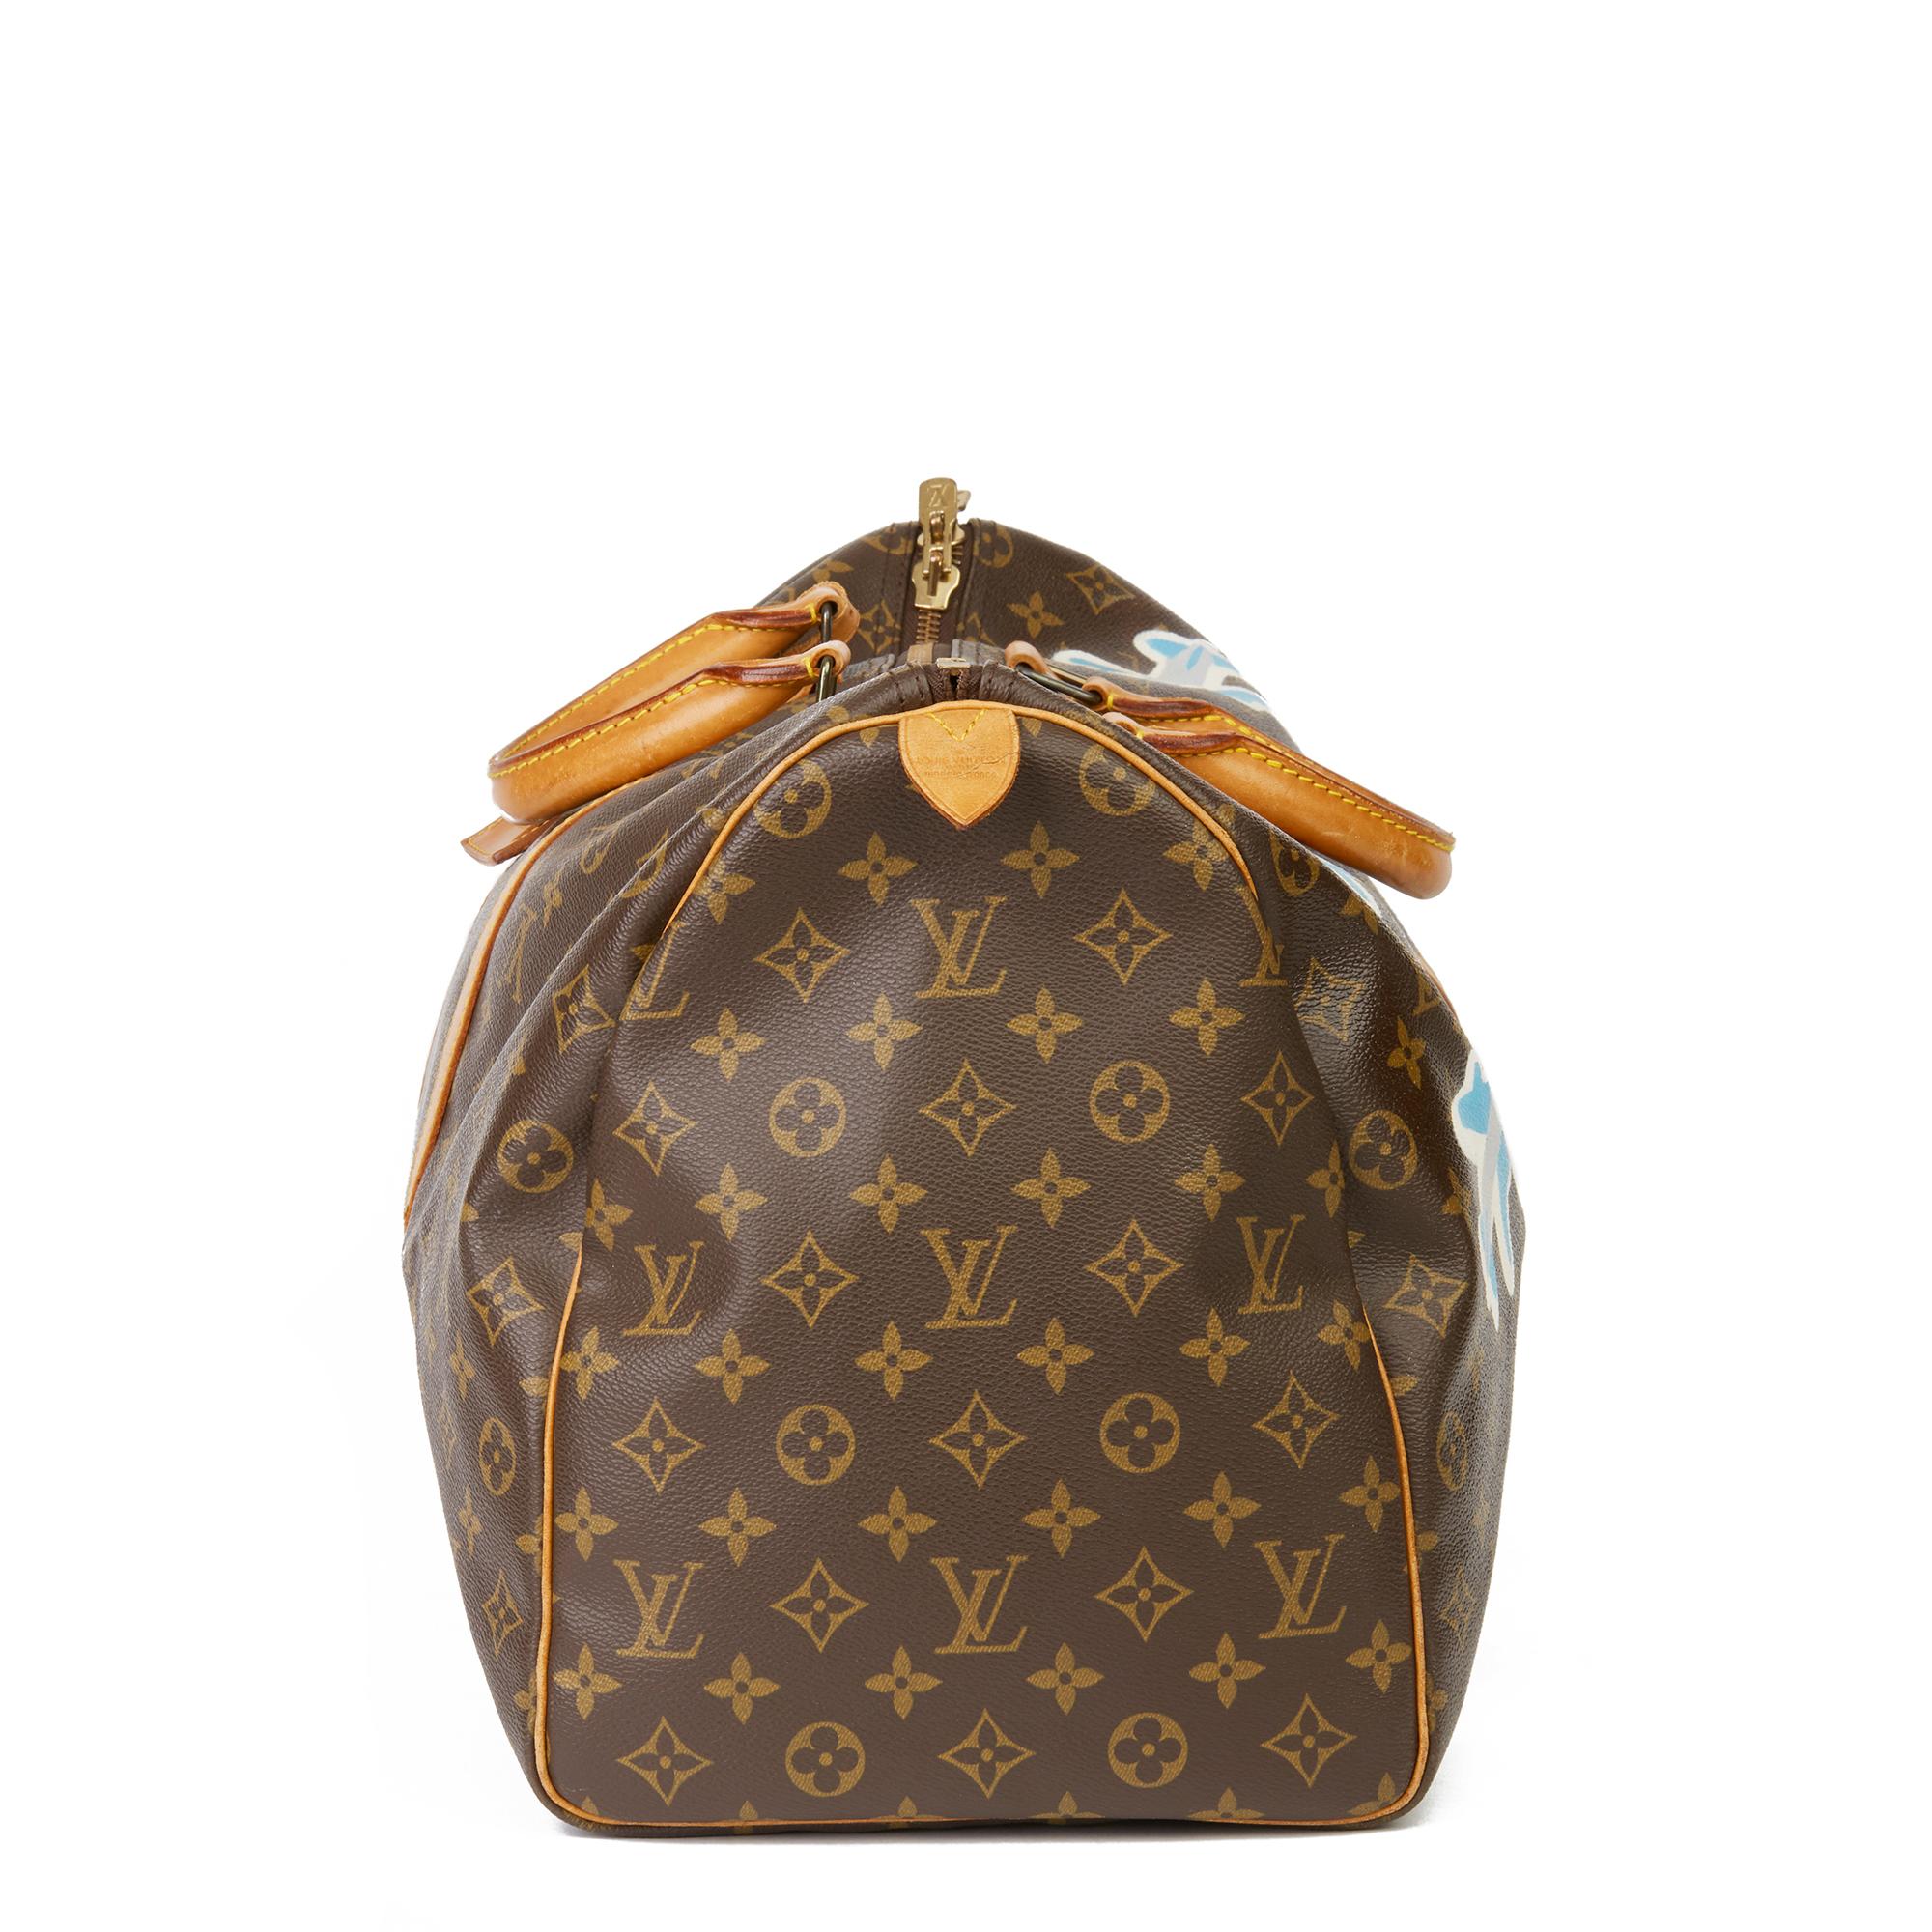 LOUIS VUITTON
X Year Zero London Hand-painted  ‘Paper Plane$’ Brown Monogram Coated Canvas Keepall 50

Xupes Reference: HB3242
Serial Number: VI 879
Age (Circa): 1989
Accompanied By: Luggage Tag
Authenticity Details: Date Stamp (Made in